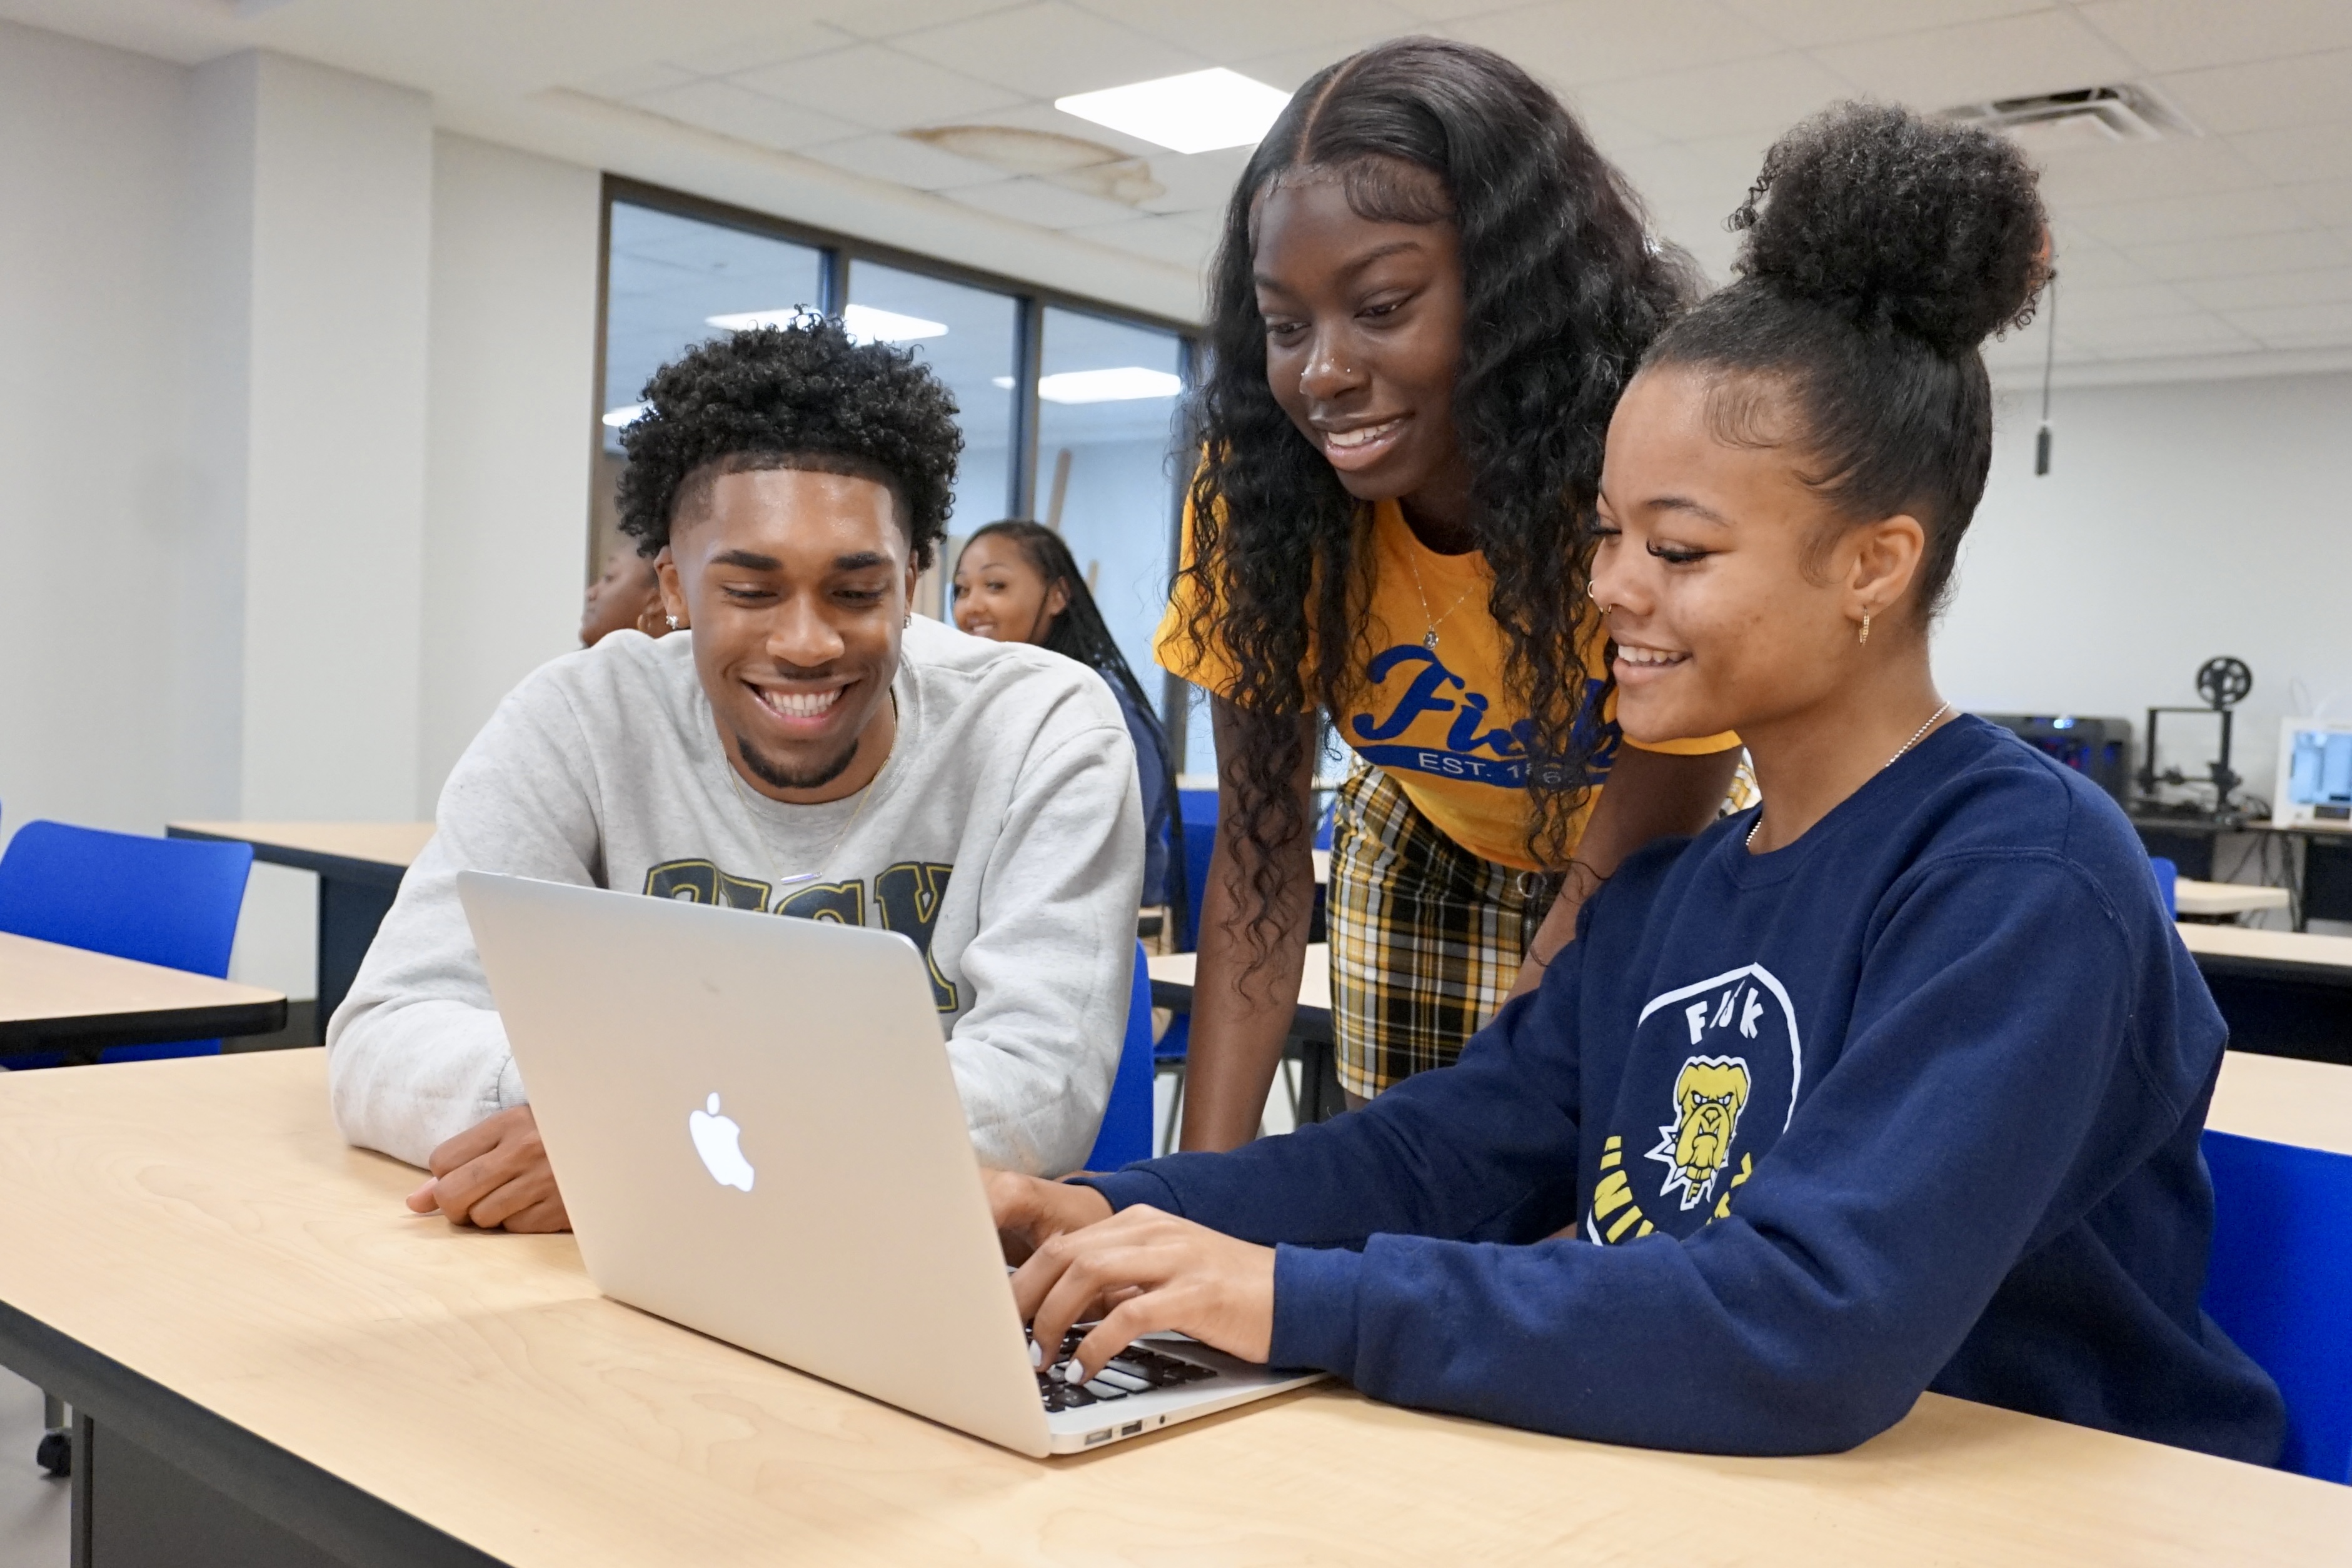 Fisk University Partners with Kaplan to Offer Students Free